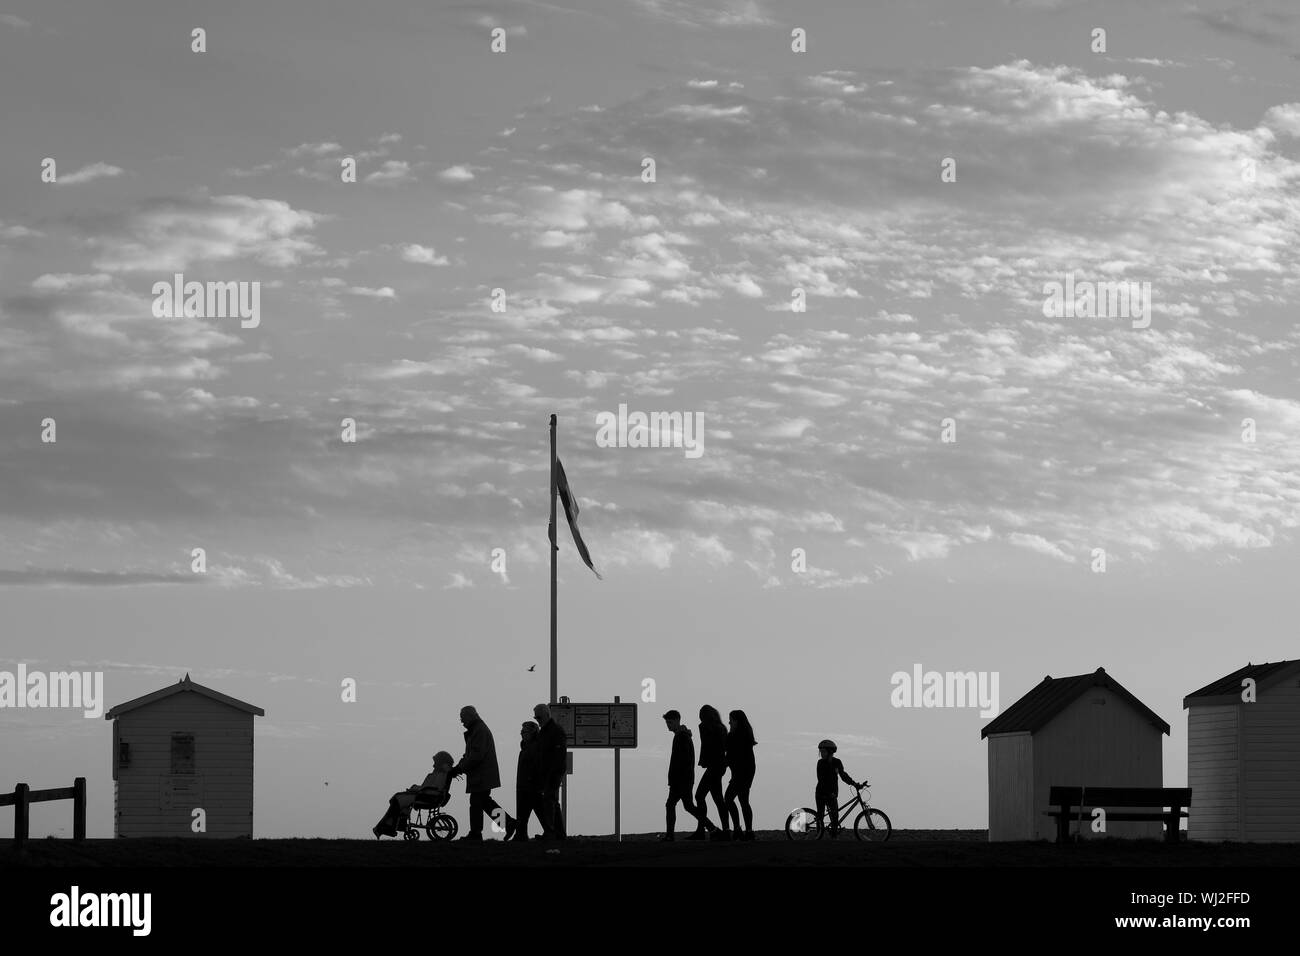 Silhouette People Walking On Street Against Cloudy Sky Stock Photo